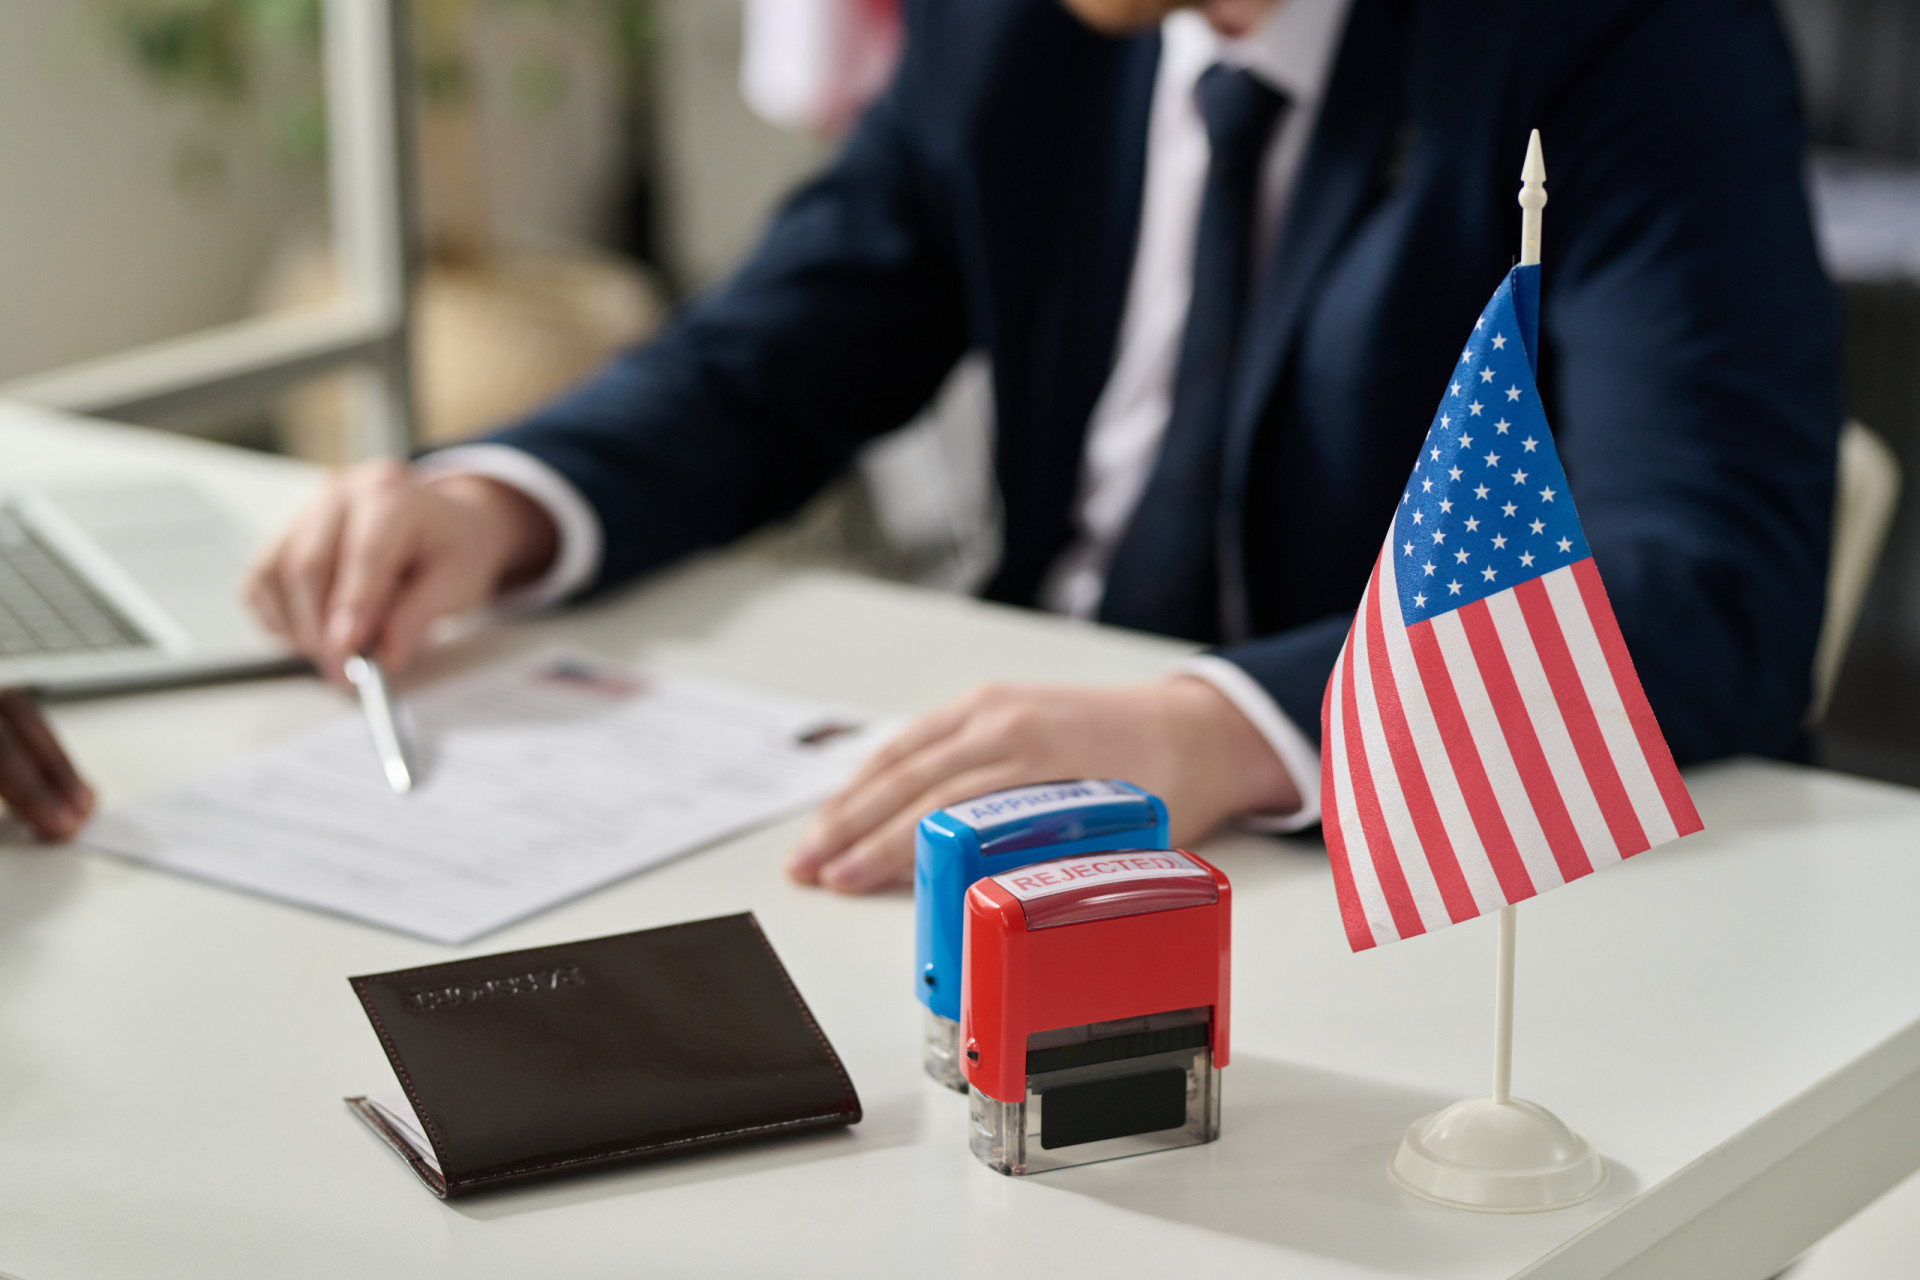 <p>Applying while in the United States is known as "adjustment of status." An application made while outside the country is known as "consular processing."</p><p>You may also like:<a href="https://www.starsinsider.com/n/338332?utm_source=msn.com&utm_medium=display&utm_campaign=referral_description&utm_content=721230en-us"> Creepy abandoned malls around the world</a></p>